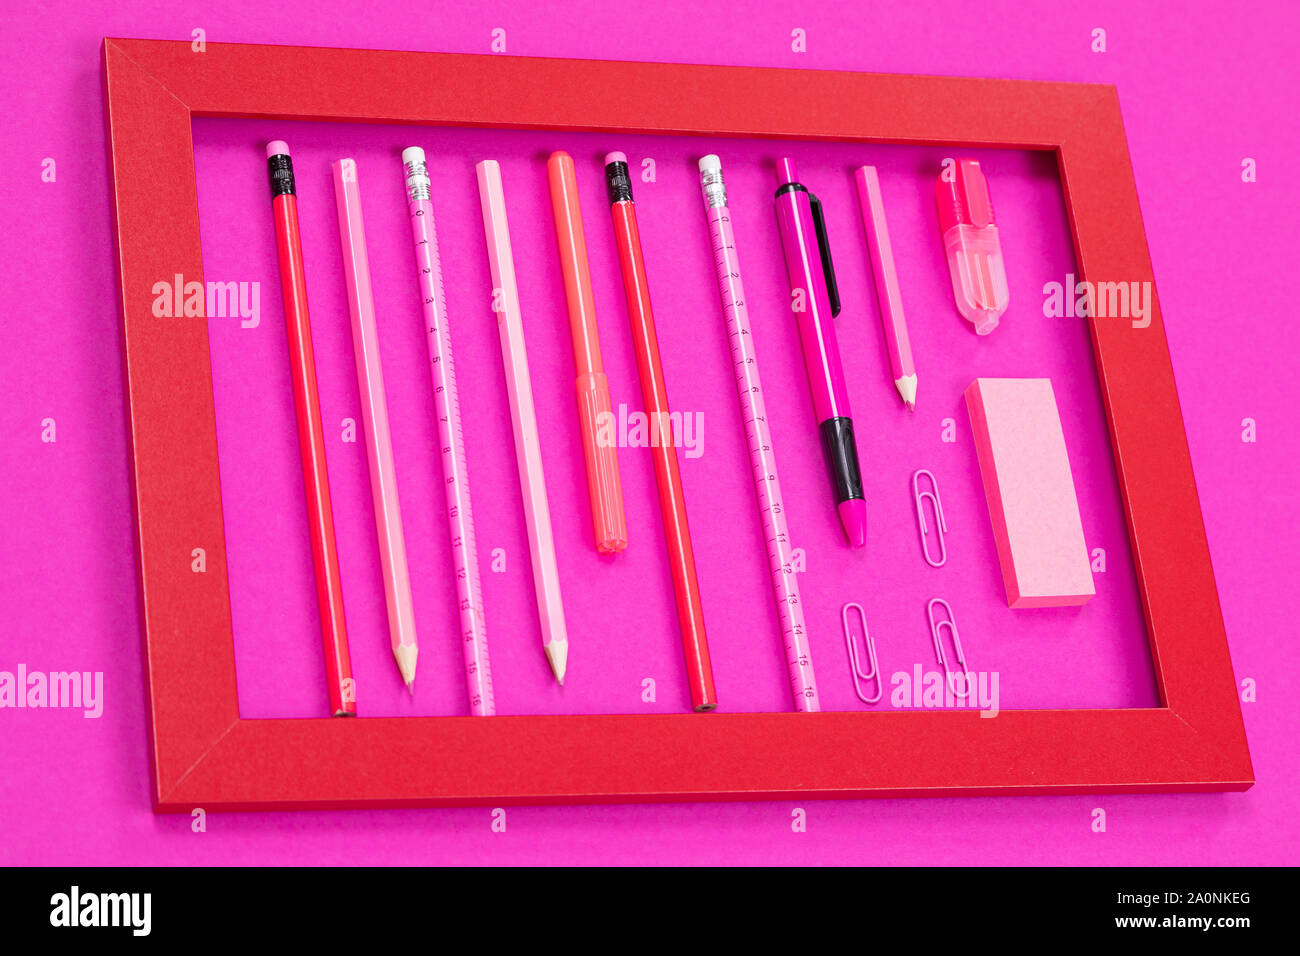 Straightly arranged group of pink color office incidentals in red frame on pink surface cutout Stock Photo